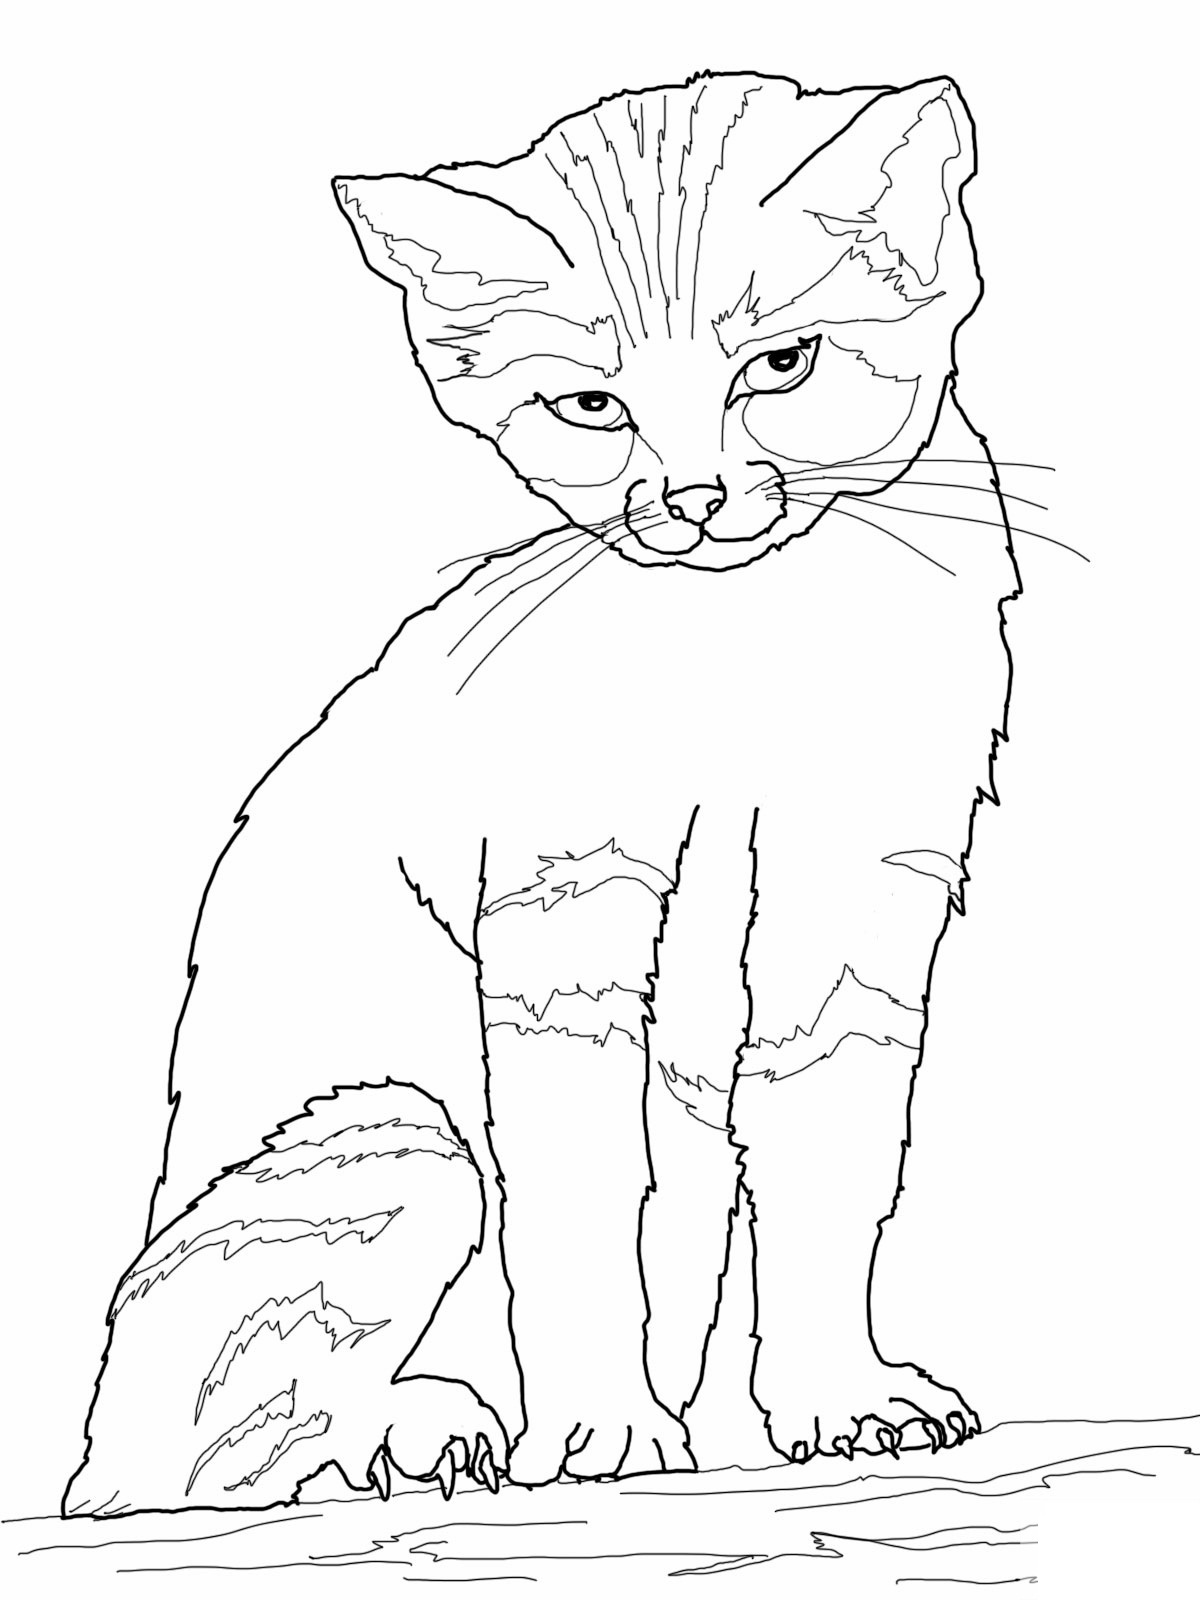 Downloadable Coloring Pages Cat